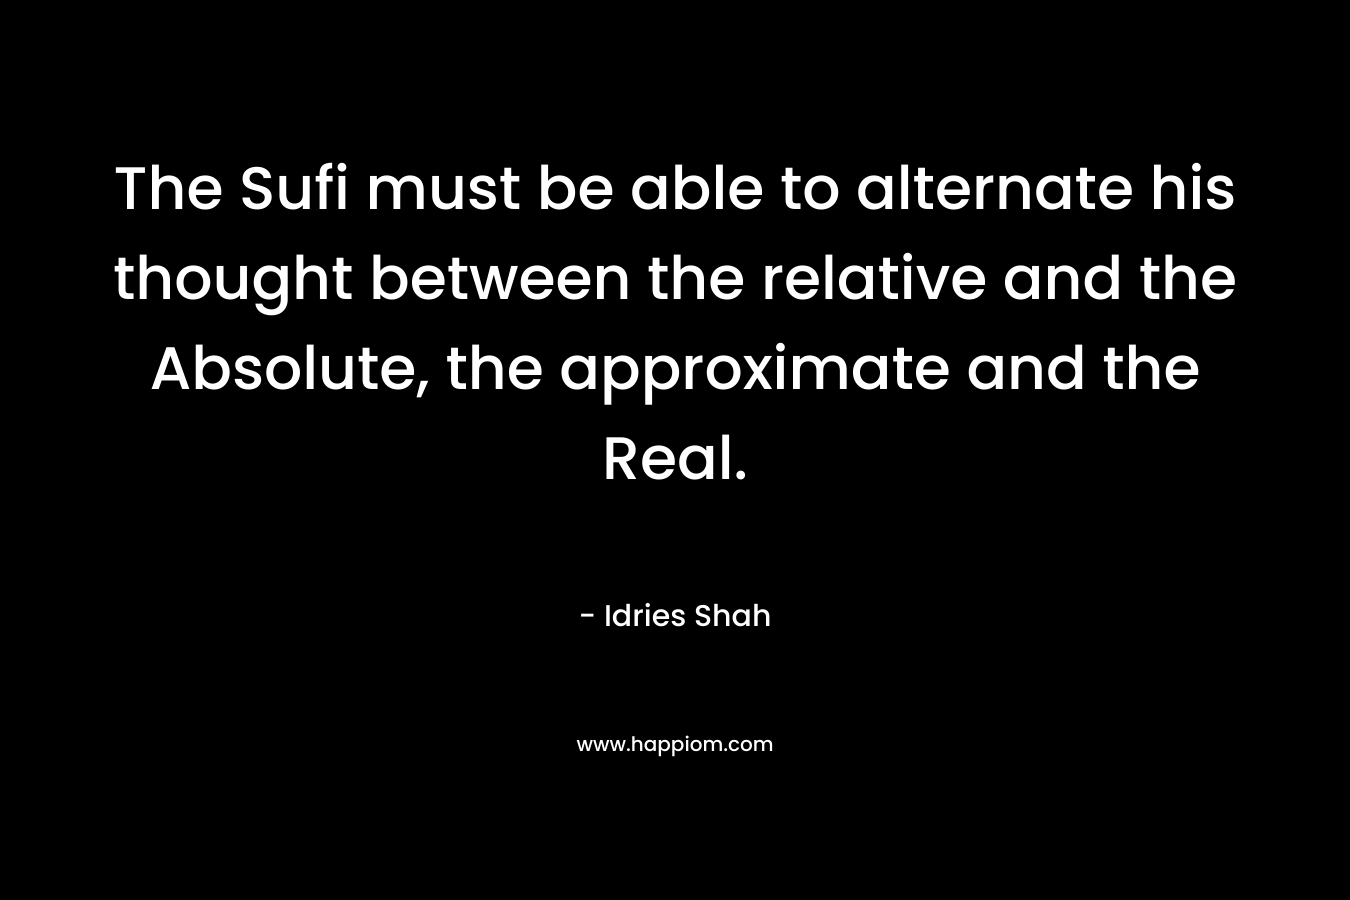 The Sufi must be able to alternate his thought between the relative and the Absolute, the approximate and the Real.